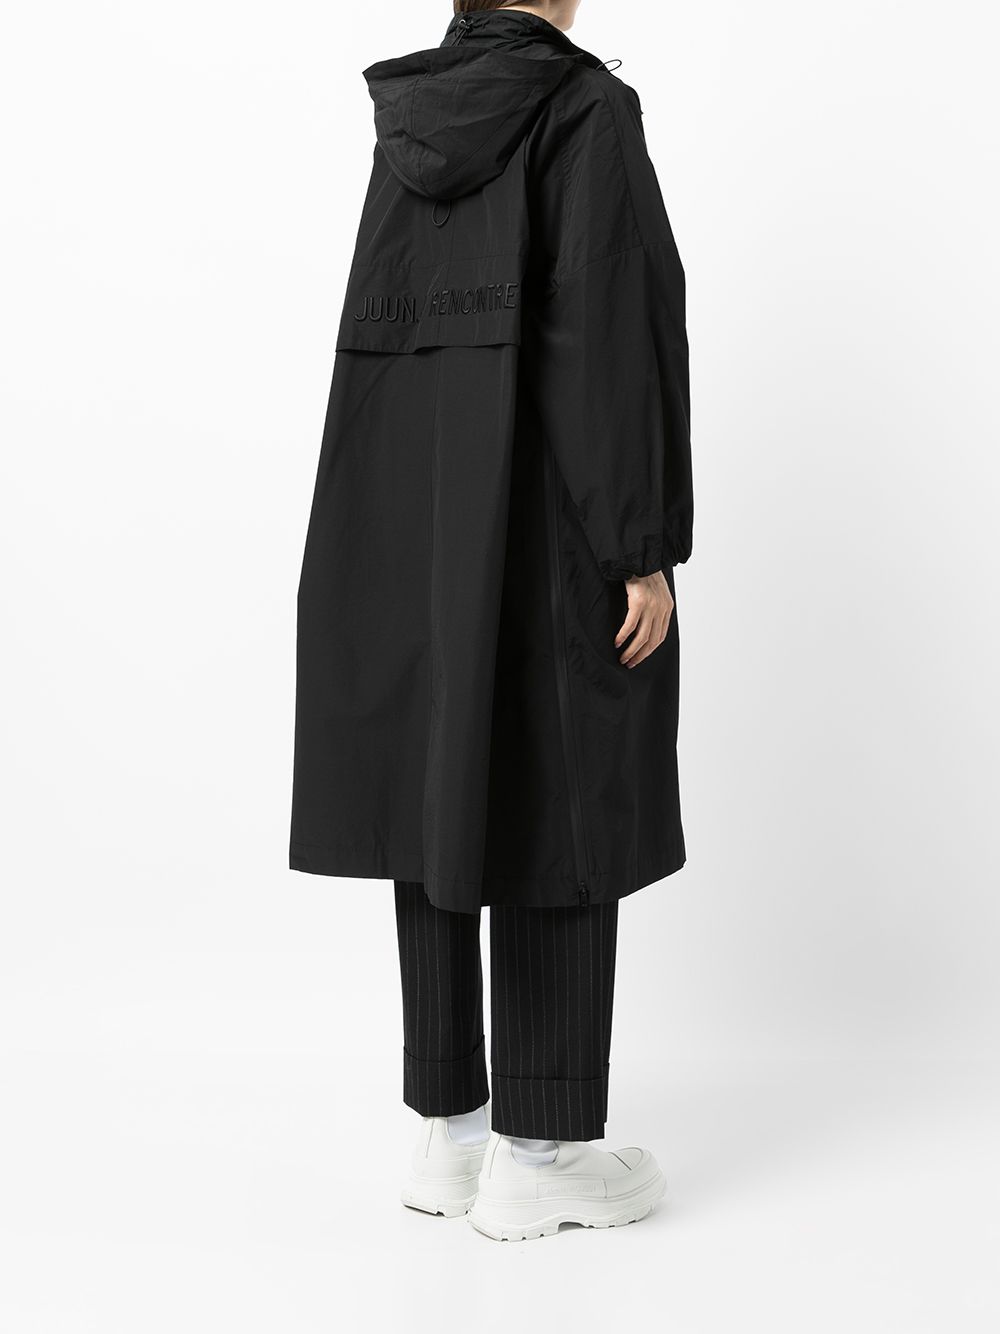 Shop Juun.J hooded oversized-cut jacket with Express Delivery - FARFETCH